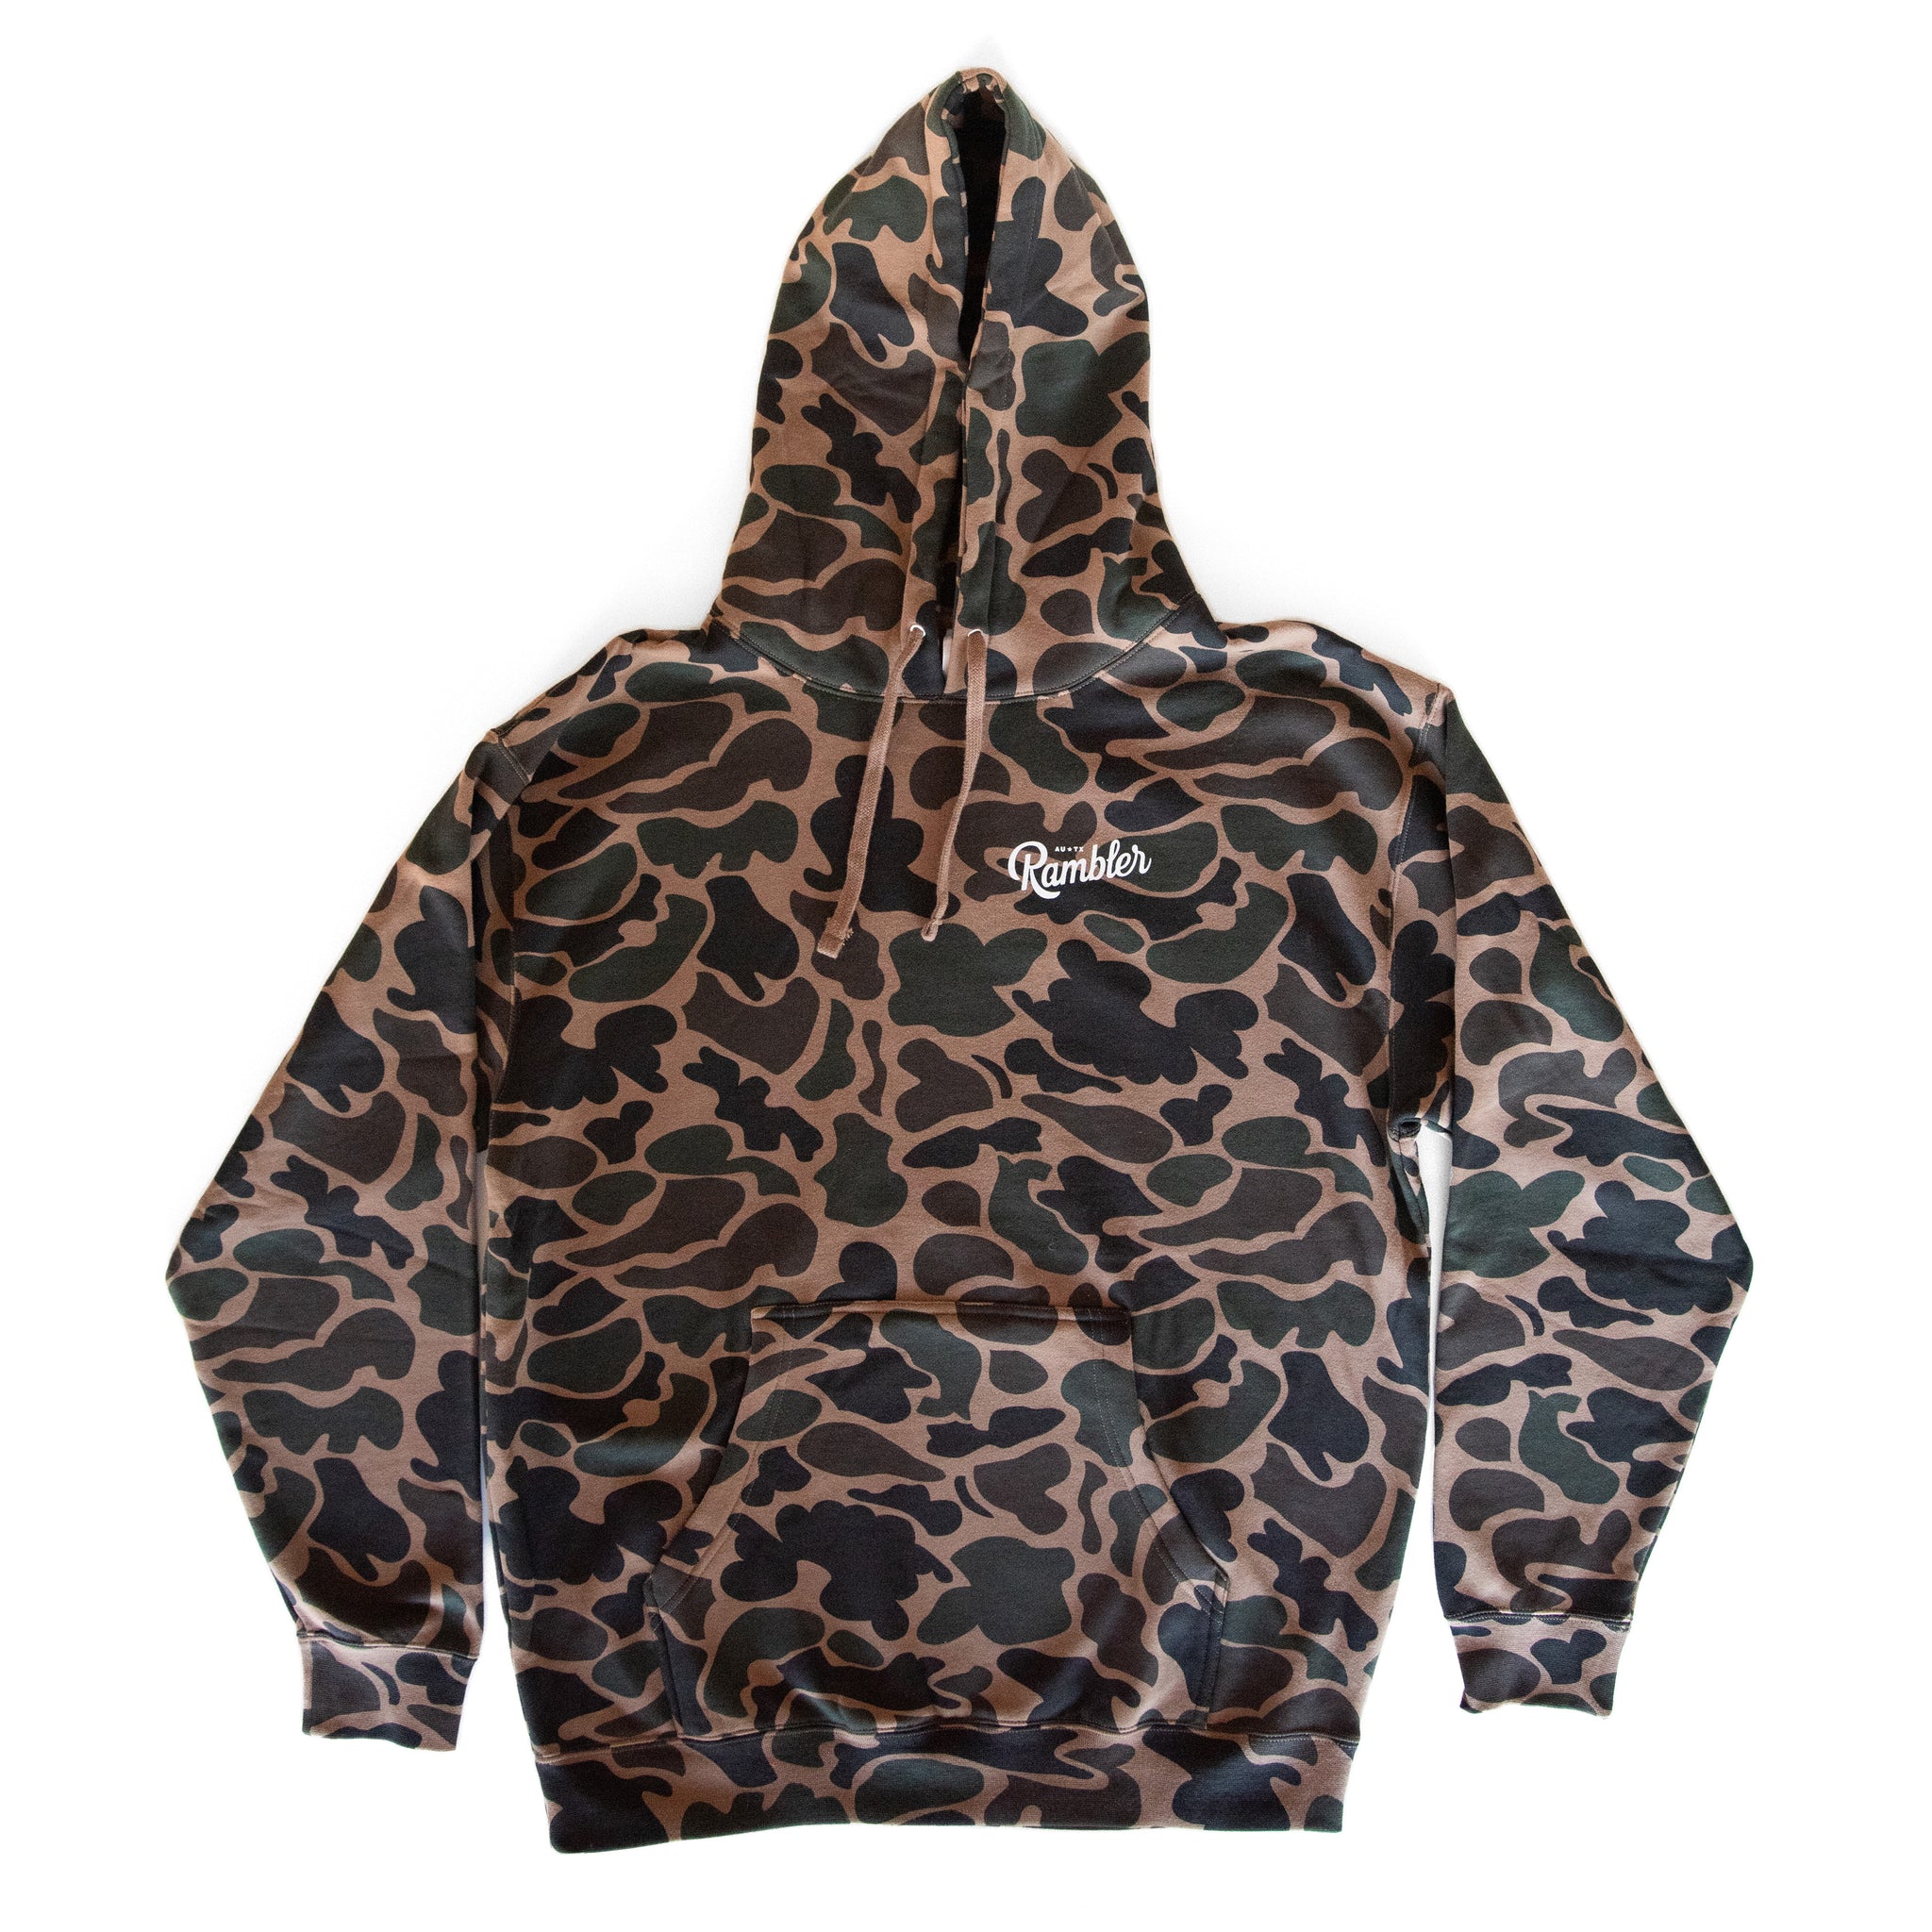 Purchase Leopard Camo Poster Online